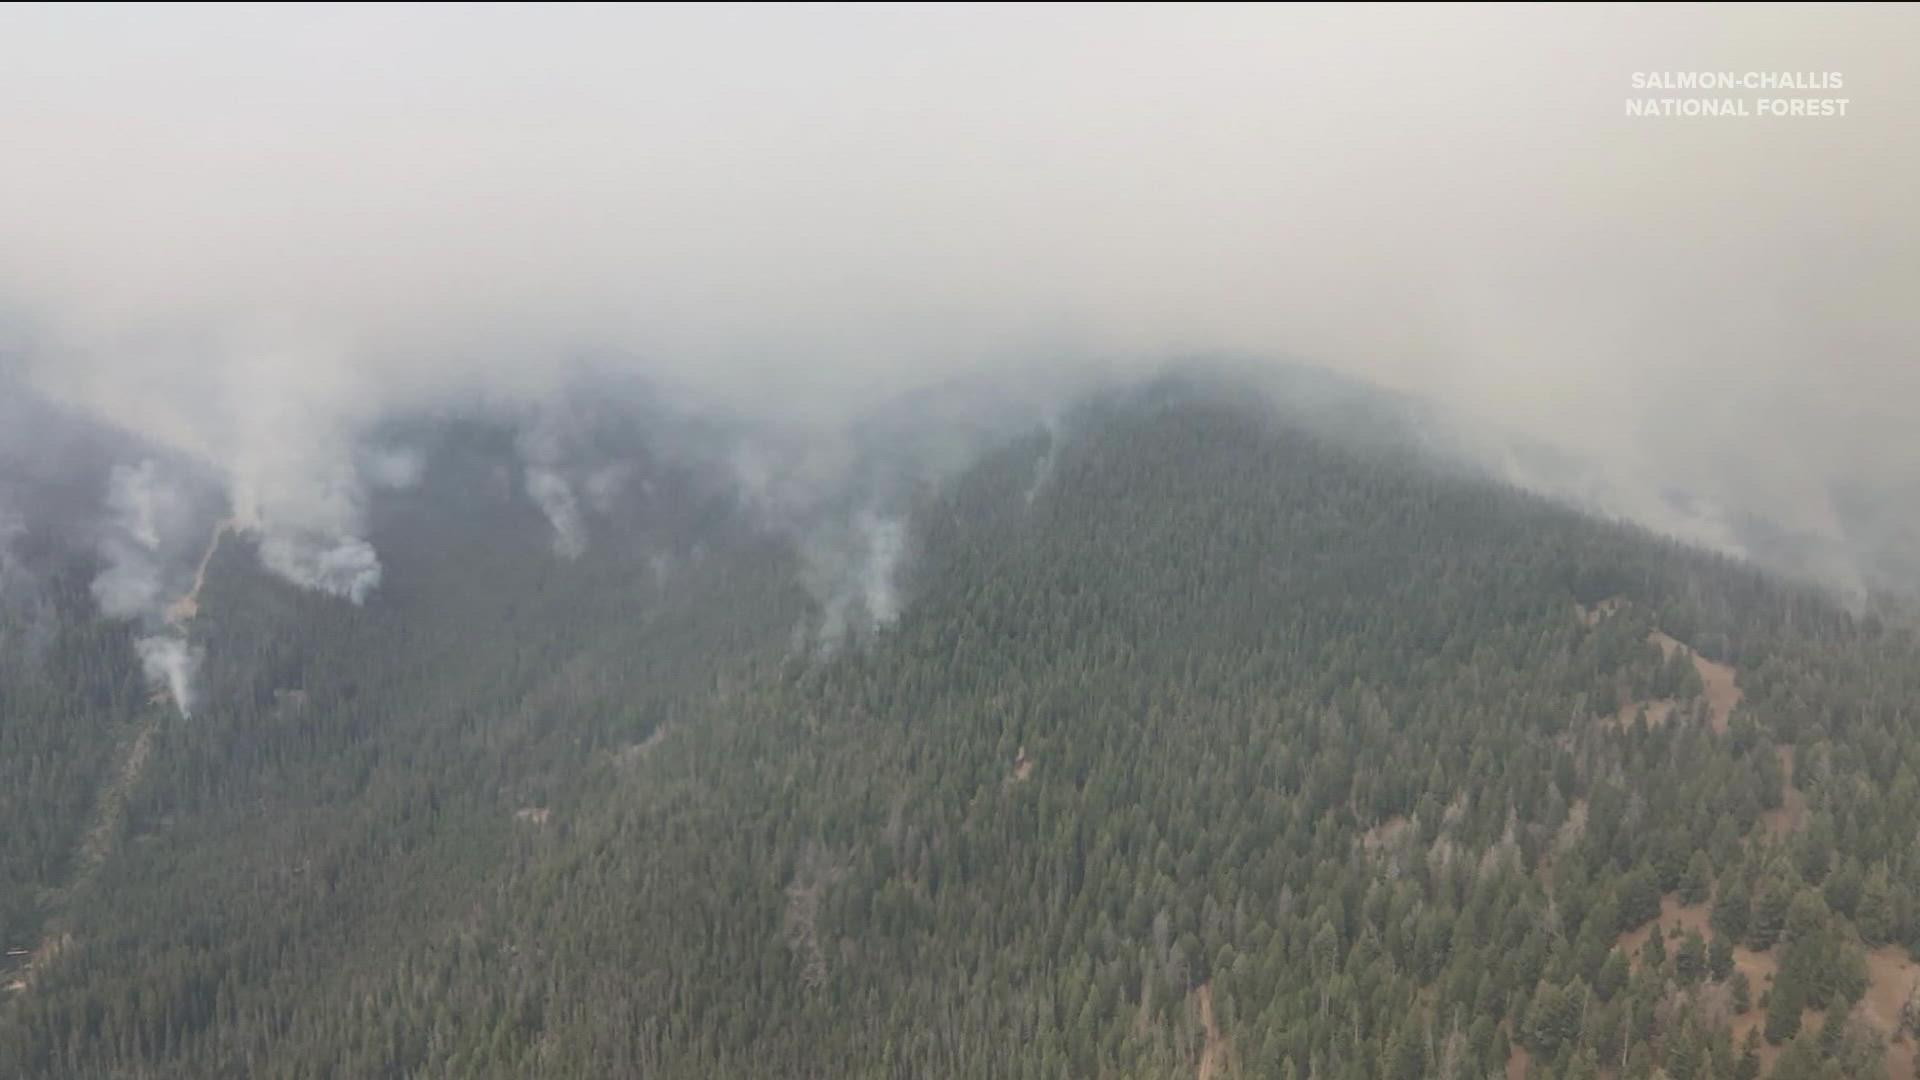 The fire northwest of Salmon started July 17, and has burned more than 203 square miles.